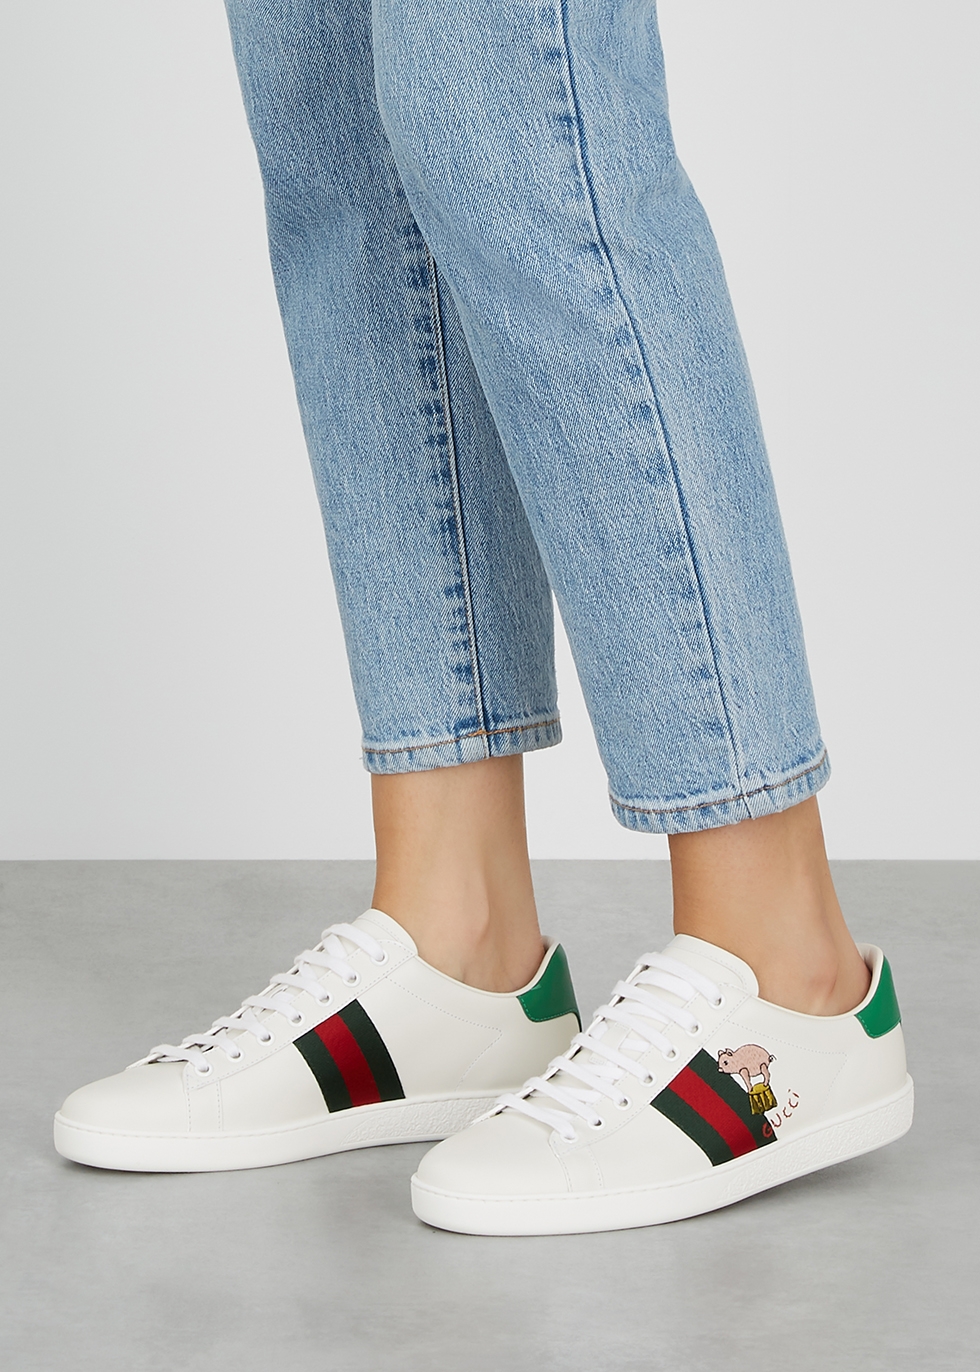 gucci sneakers pig